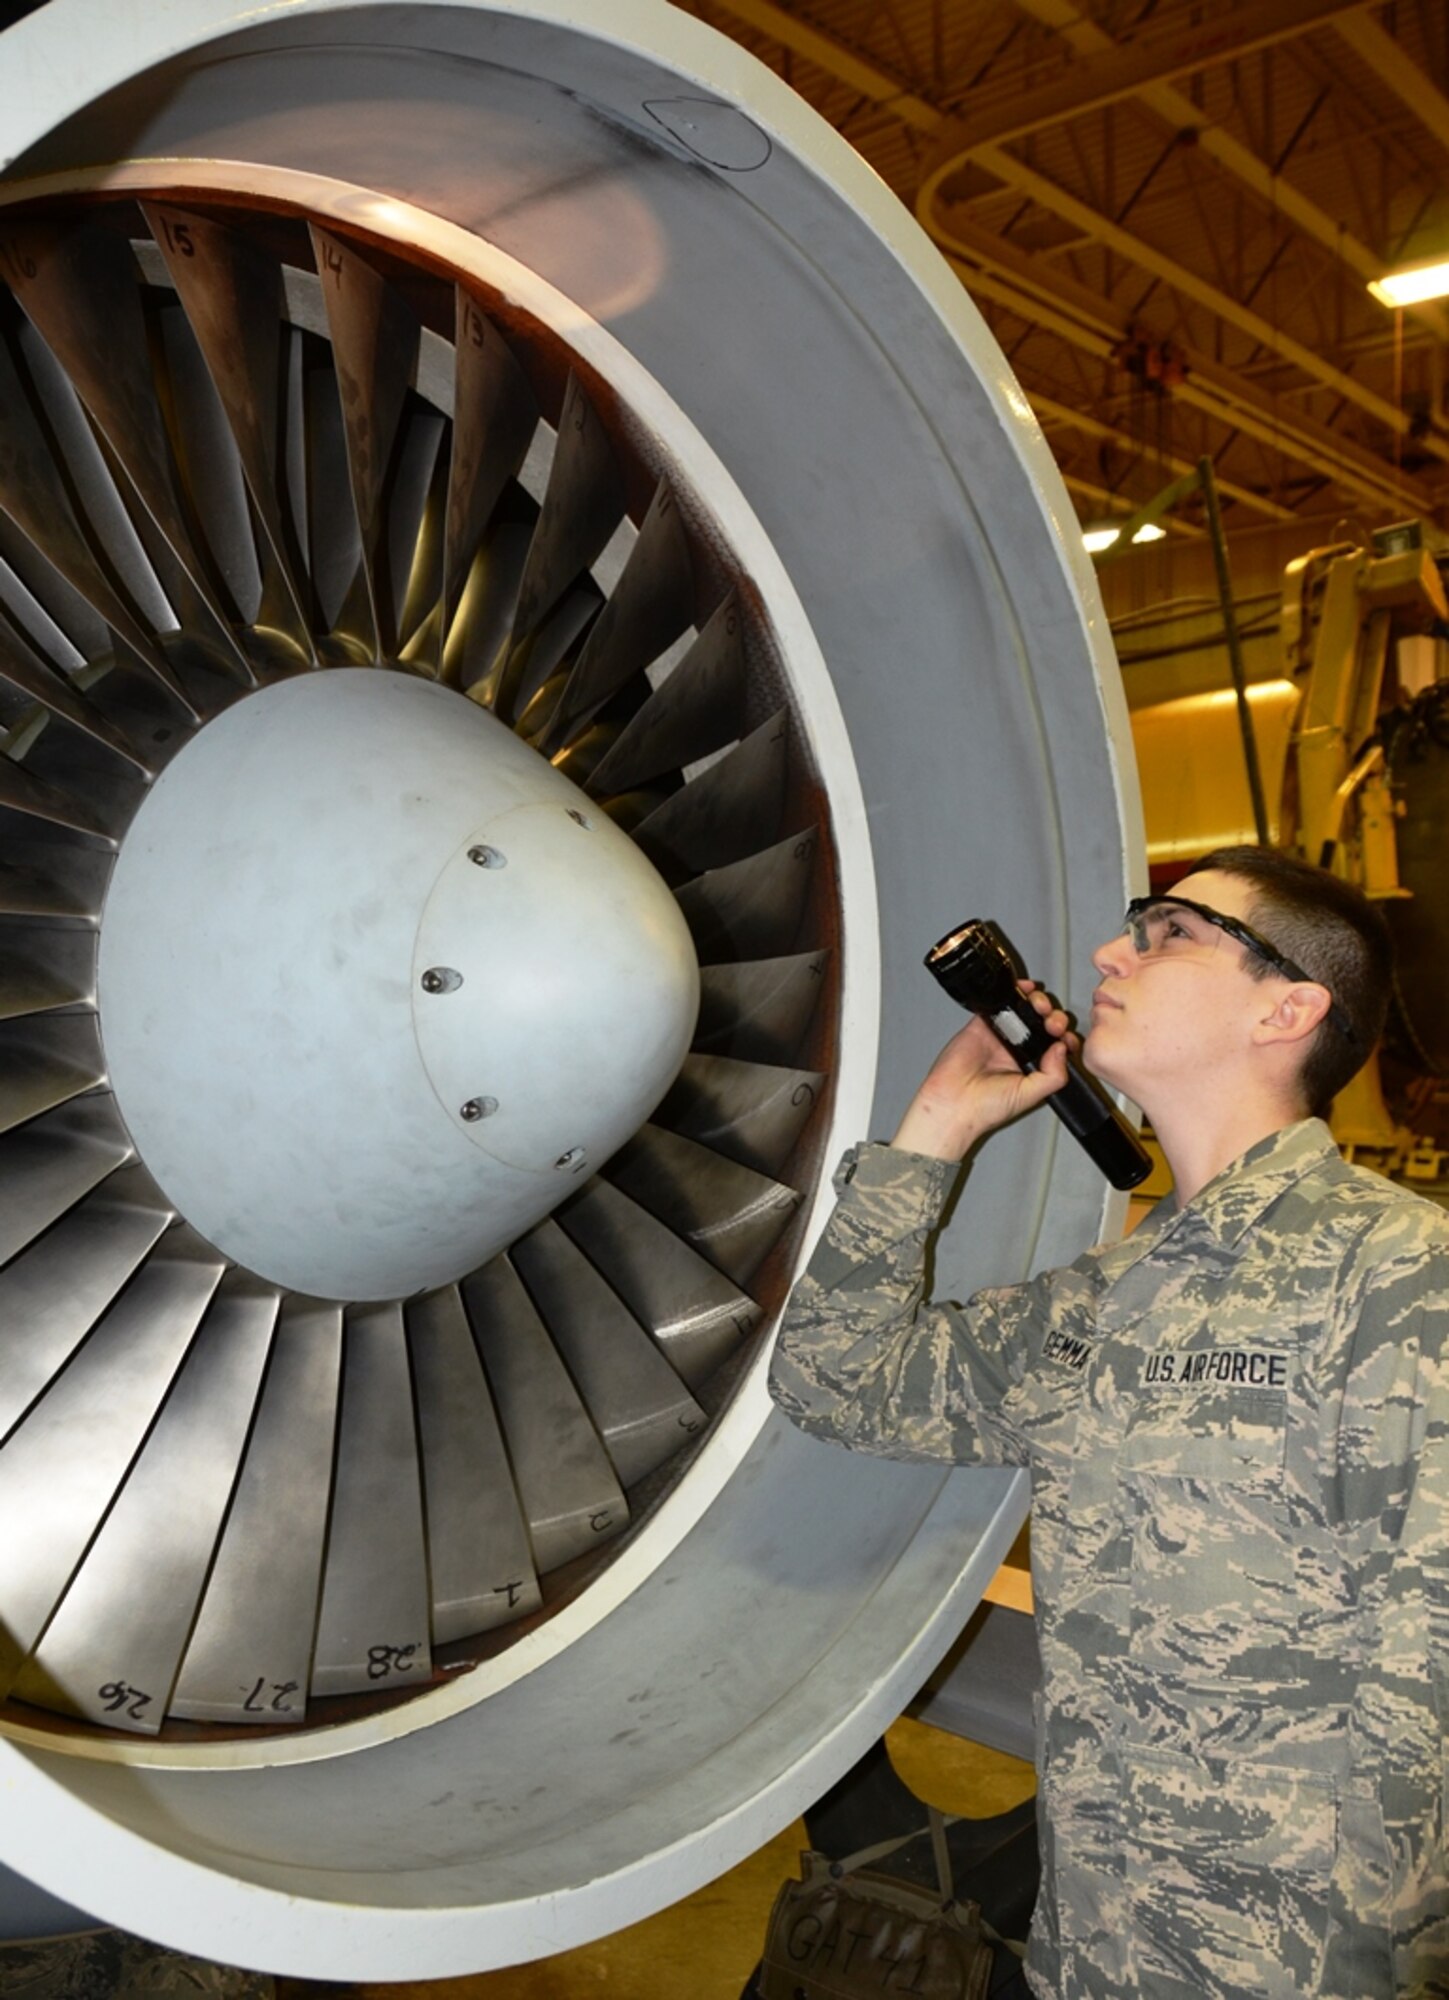 Airman 1st Class Michael Gemma, 175th Maintenance Squadron aircraft engine mechanic, inspects the blades of a T-34 engine at Warfield Air National Guard Base in Baltimore, Md. Gemma is the 175th Wing April Airman Spotlight. (U.S. Air National Guard photo by Tech. Sgt. David Speicher/RELEASED)